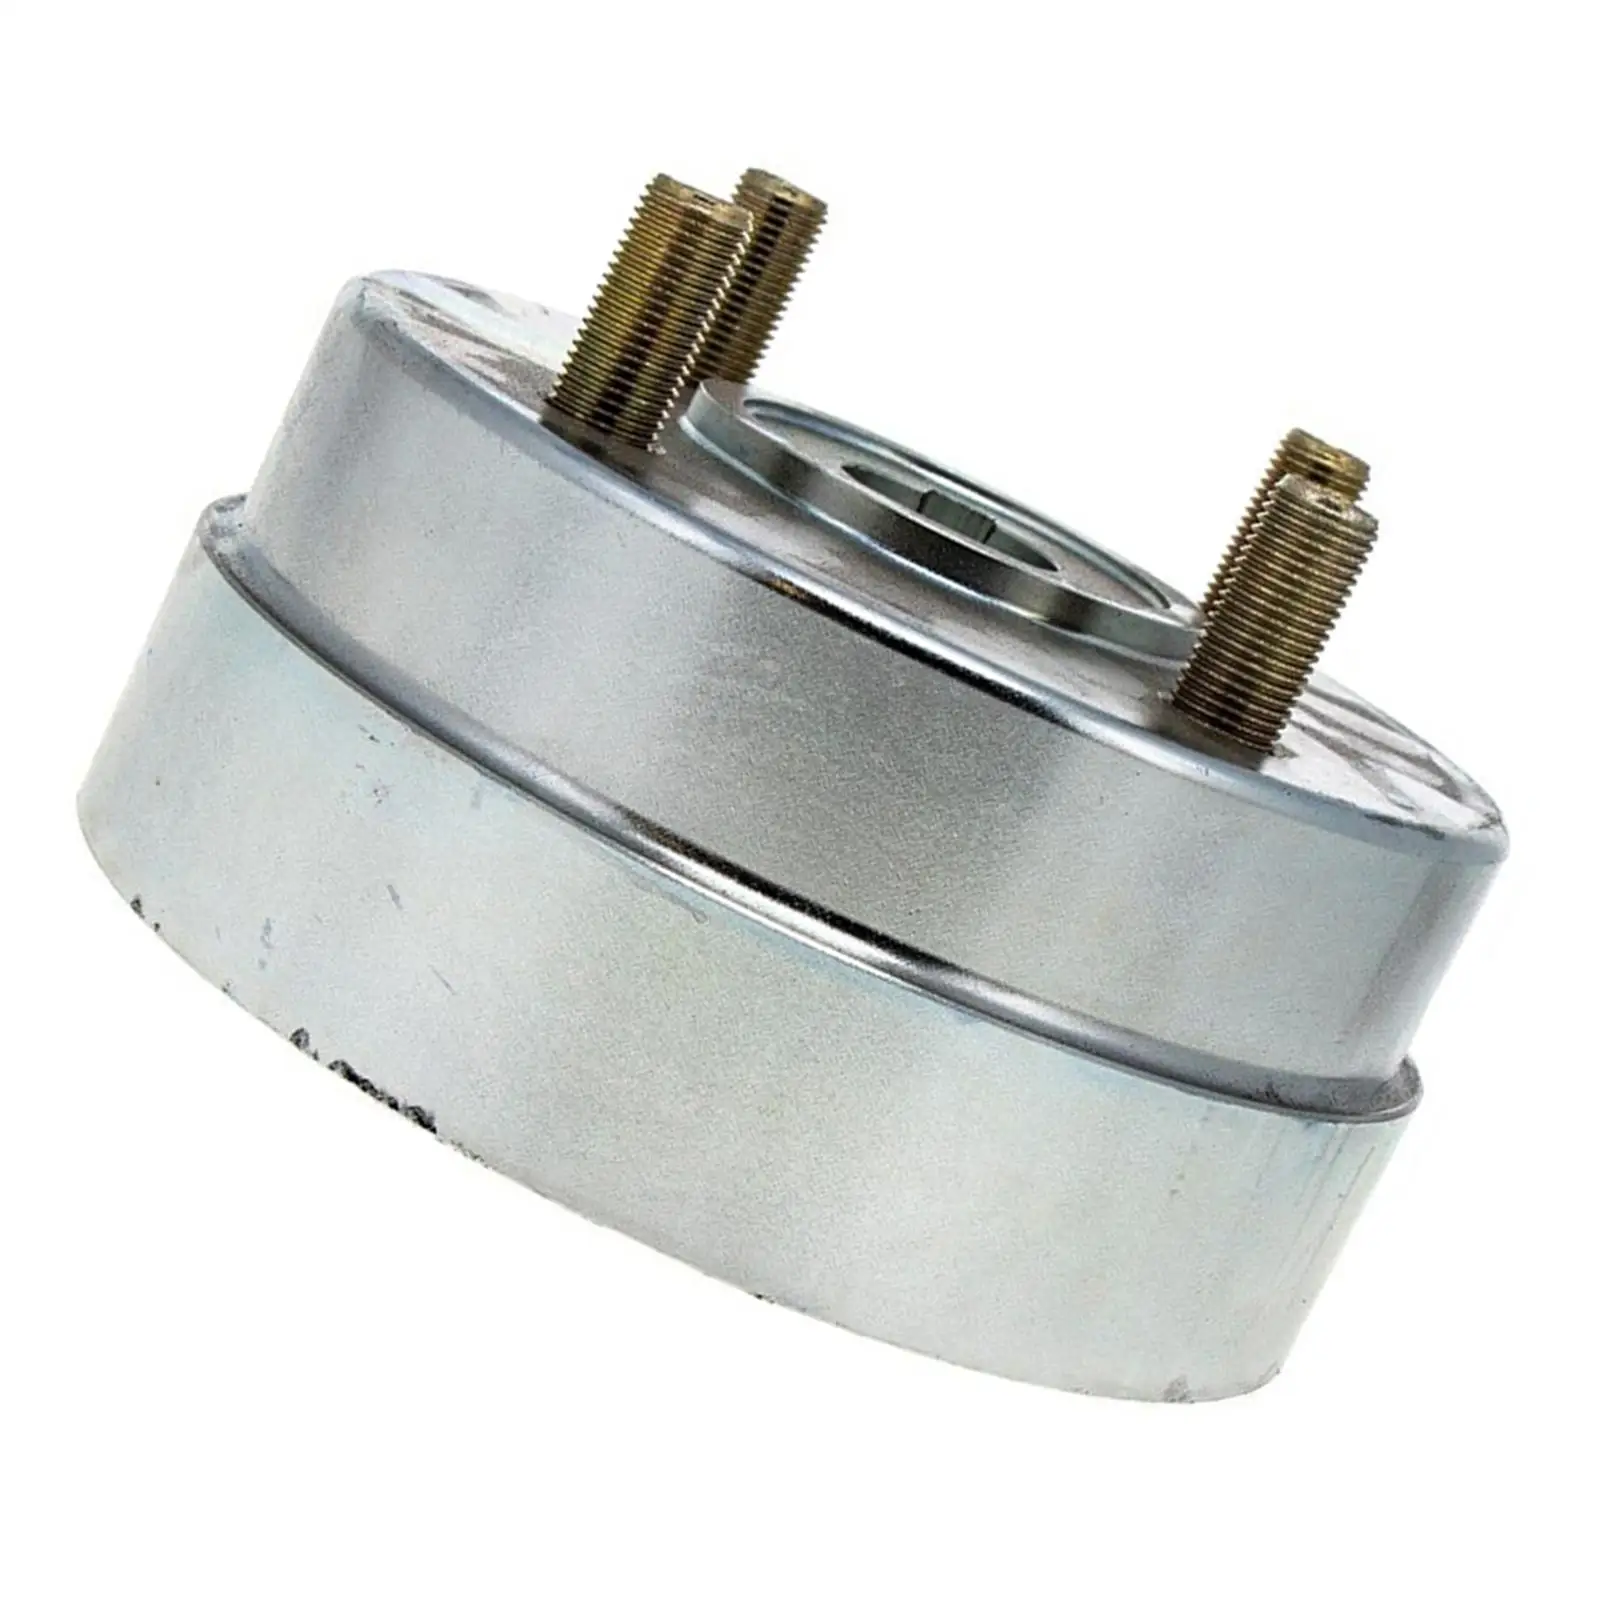 

Wheel Hub 1-634927 103-0590 Replace Sturdy High Quality Lawn Mower Parts Metal with Studs for Z AC XP LC ct as